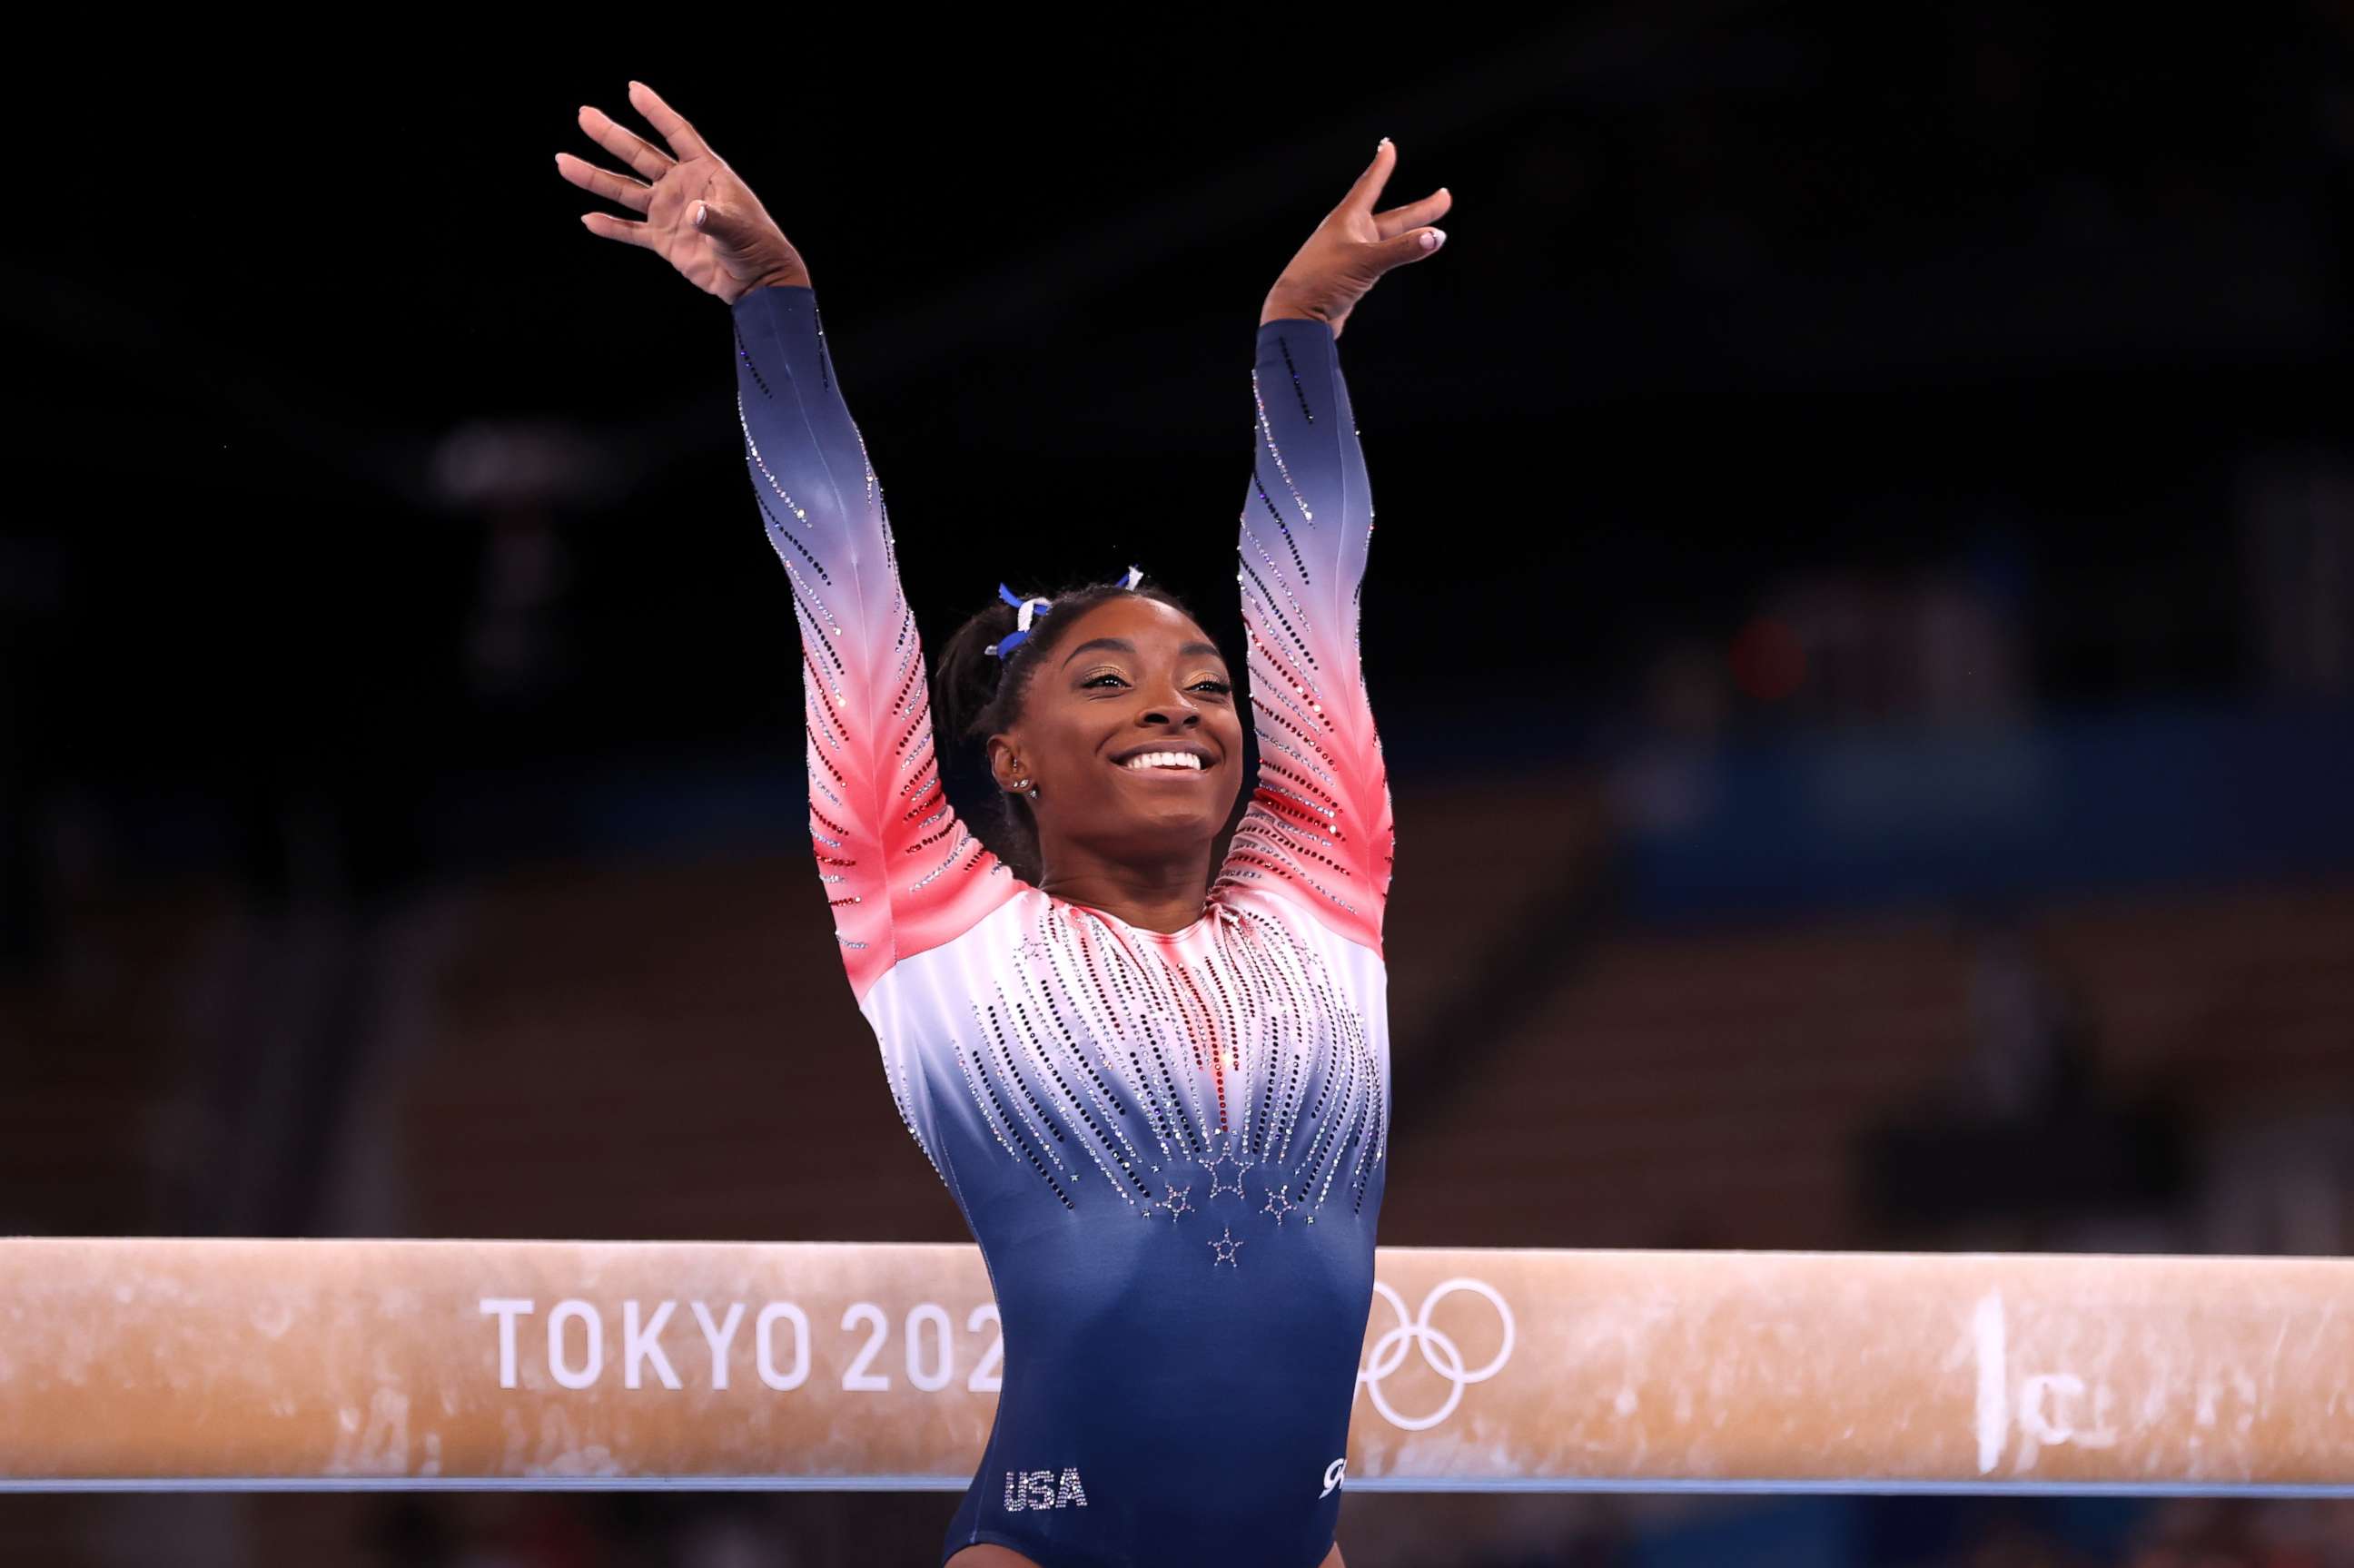 PHOTO: Simone Biles competes in the Women's Balance Beam Final on day eleven of the Tokyo 2020 Olympic Games at Ariake Gymnastics Centre on Aug. 3, 2021 in Tokyo.